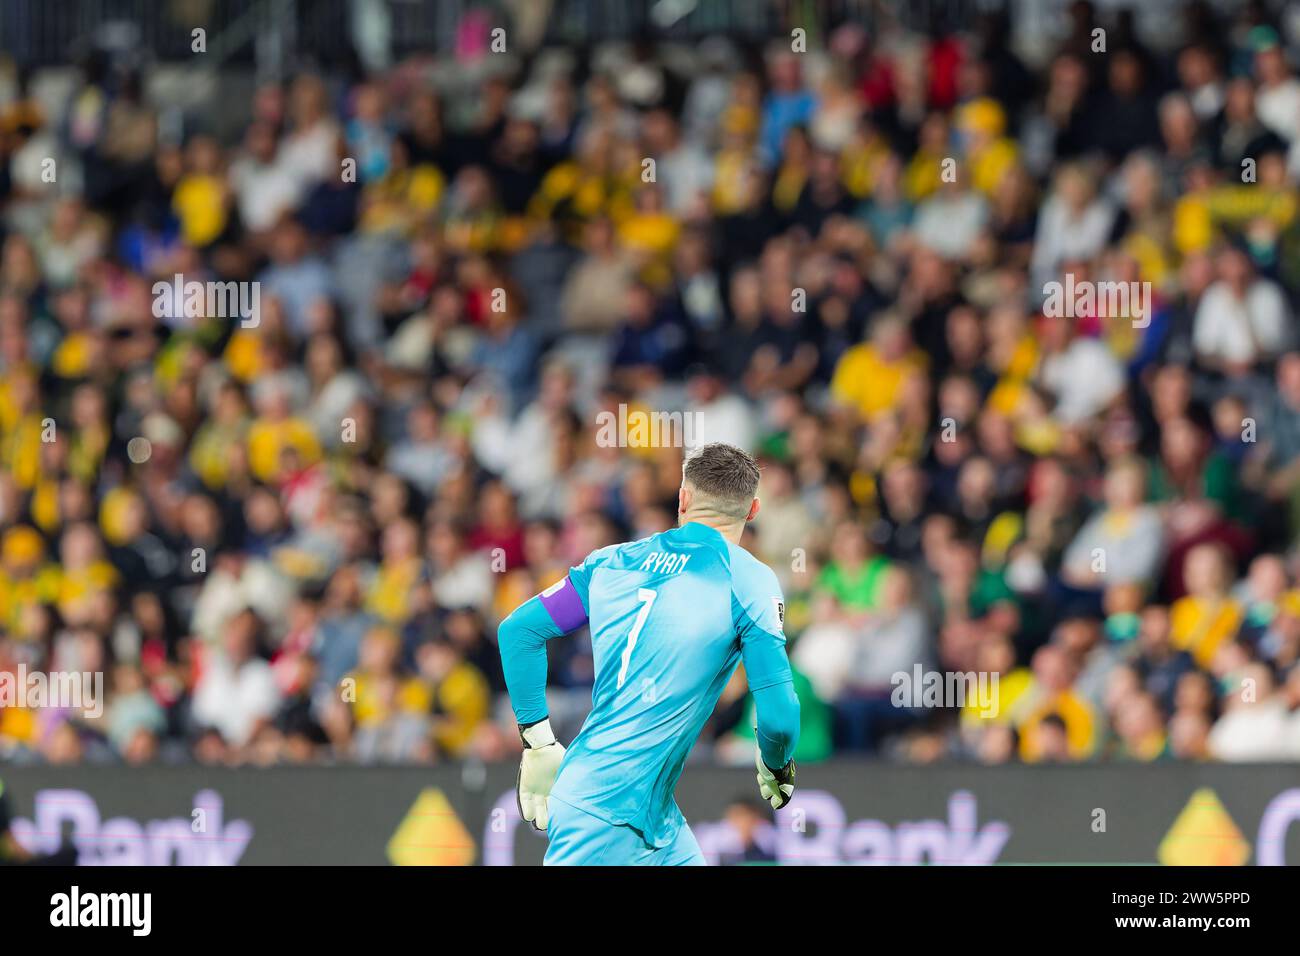 Sydney, Australia. 21st Mar, 2024. Mathew Ryan of Australia looks on during the FIFA World Cup 2026 Qualifier match between Australia and Lebanon at Western Sydney Stadium on March 21, 2024 in Sydney, Australia Credit: IOIO IMAGES/Alamy Live News Stock Photo